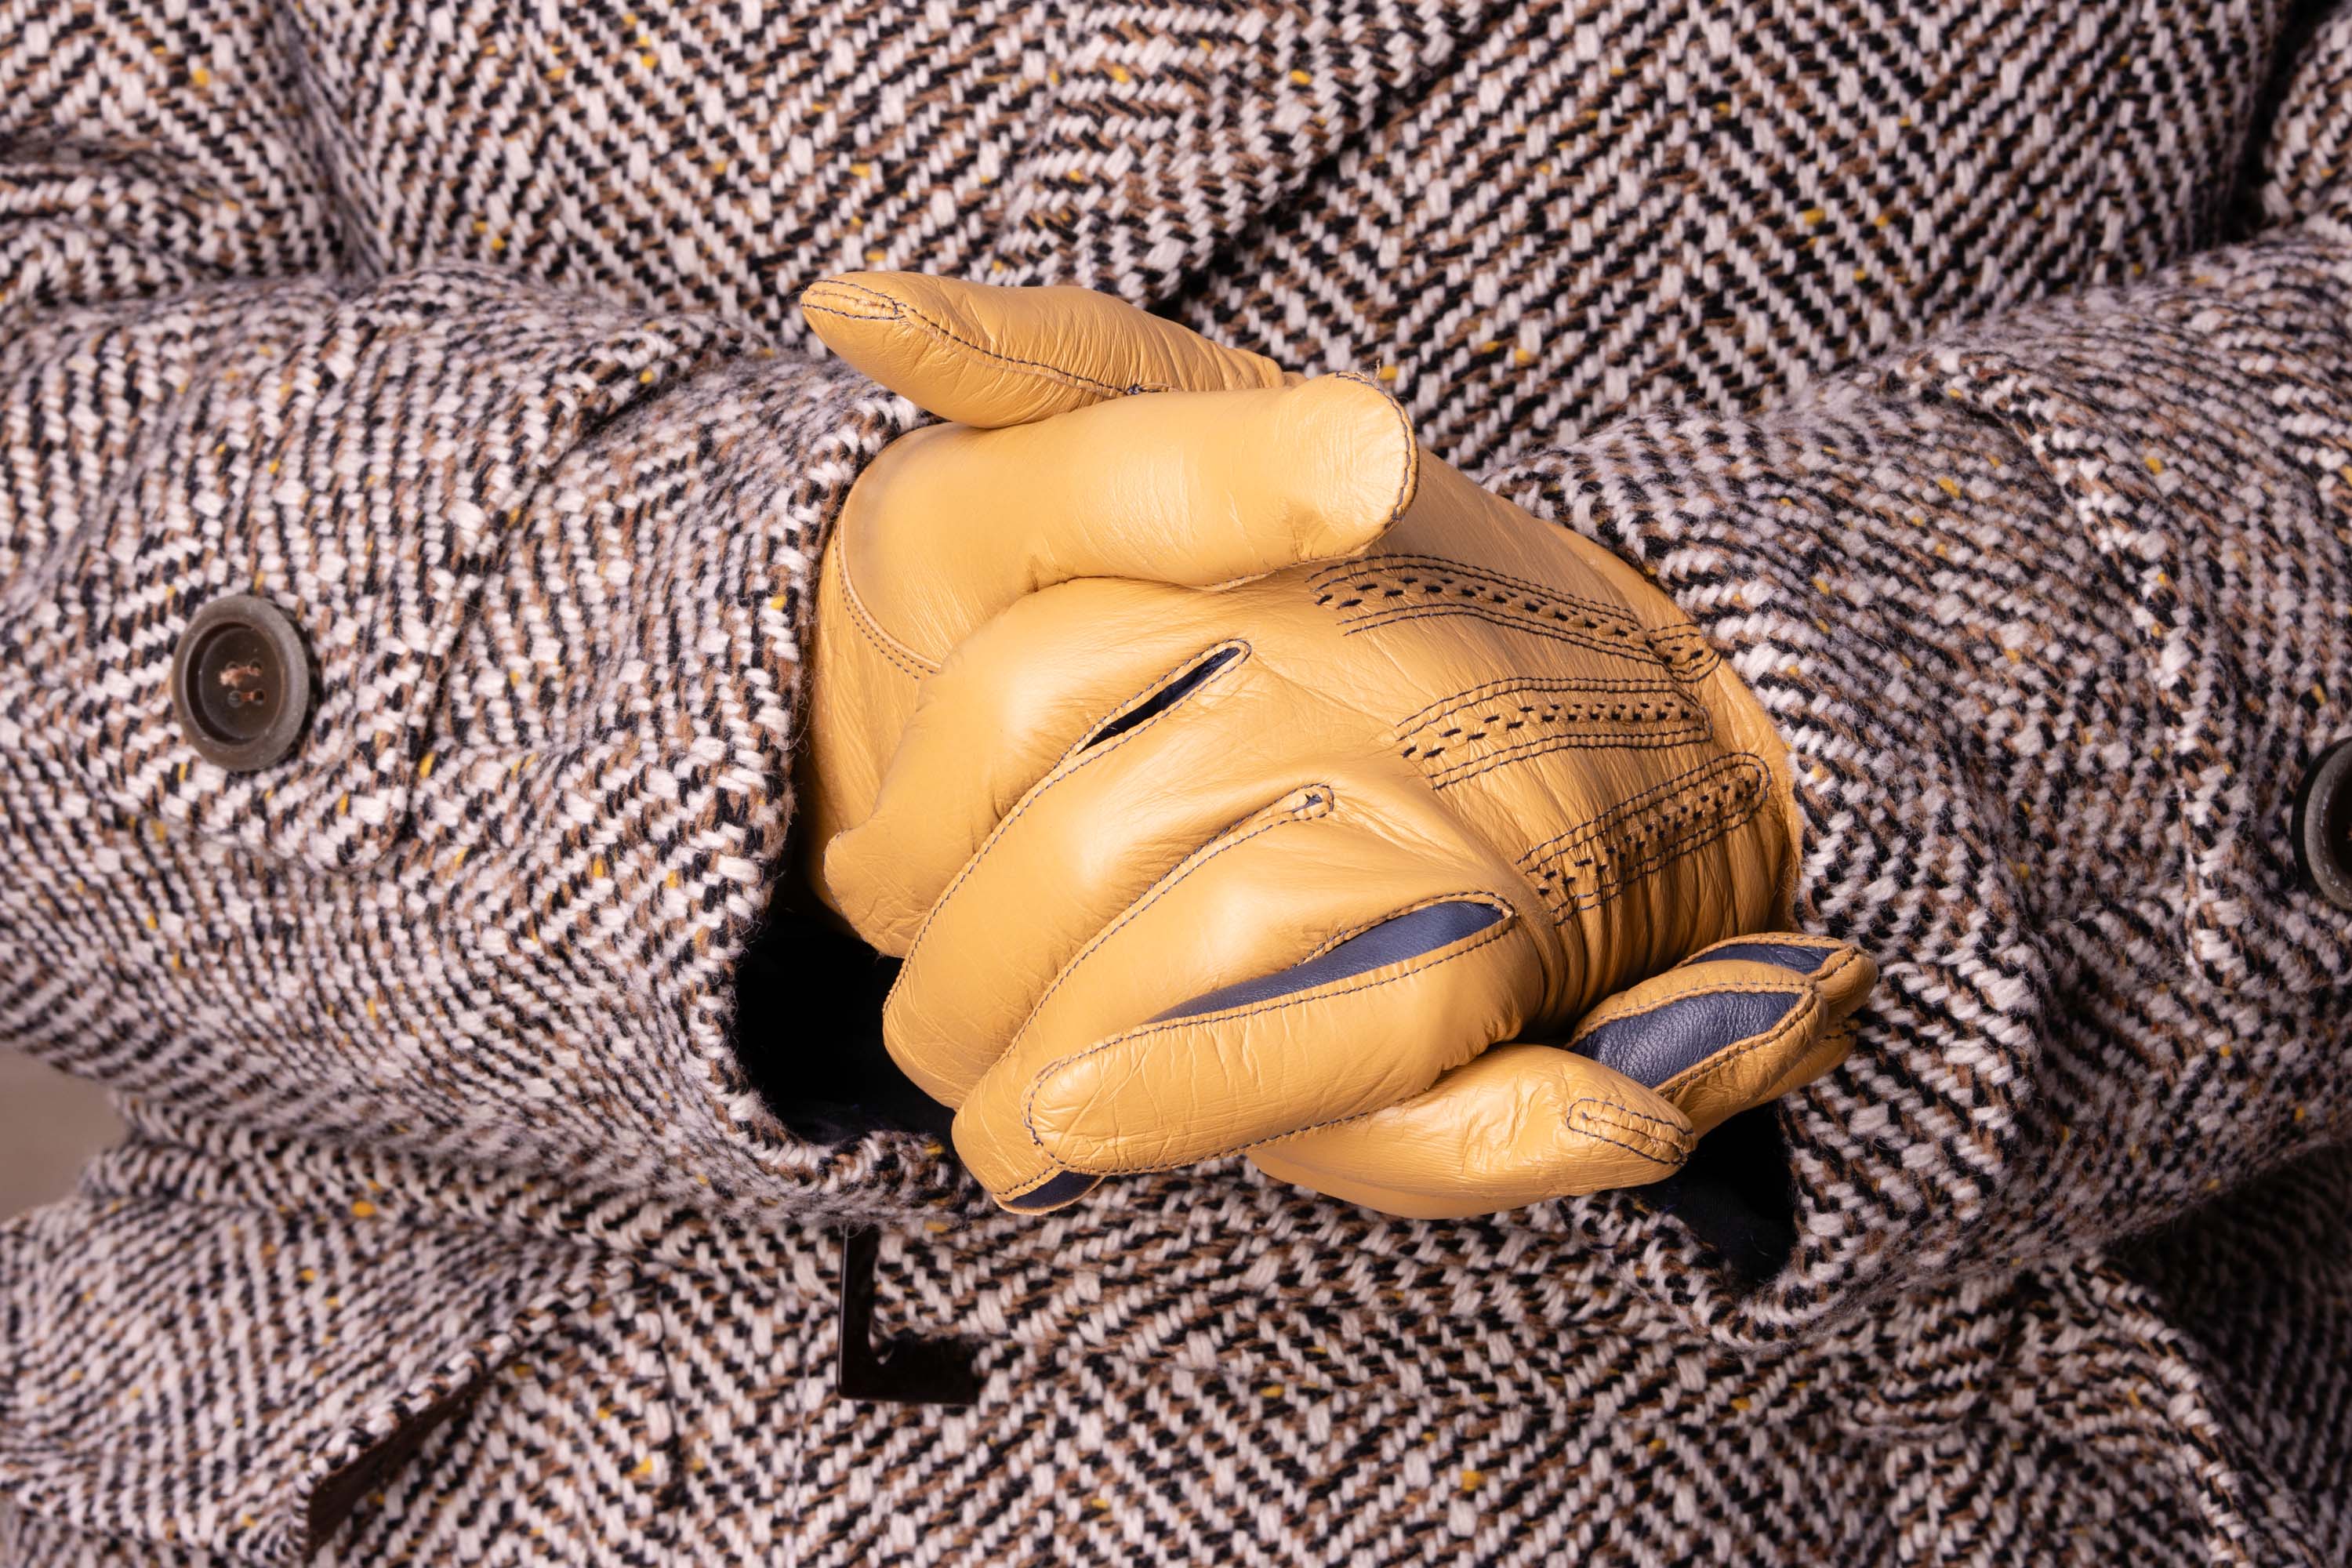 Light Tan Lamb Nappa Touchscreen Gloves with Denim Blue Contrast Focused Image When Worn